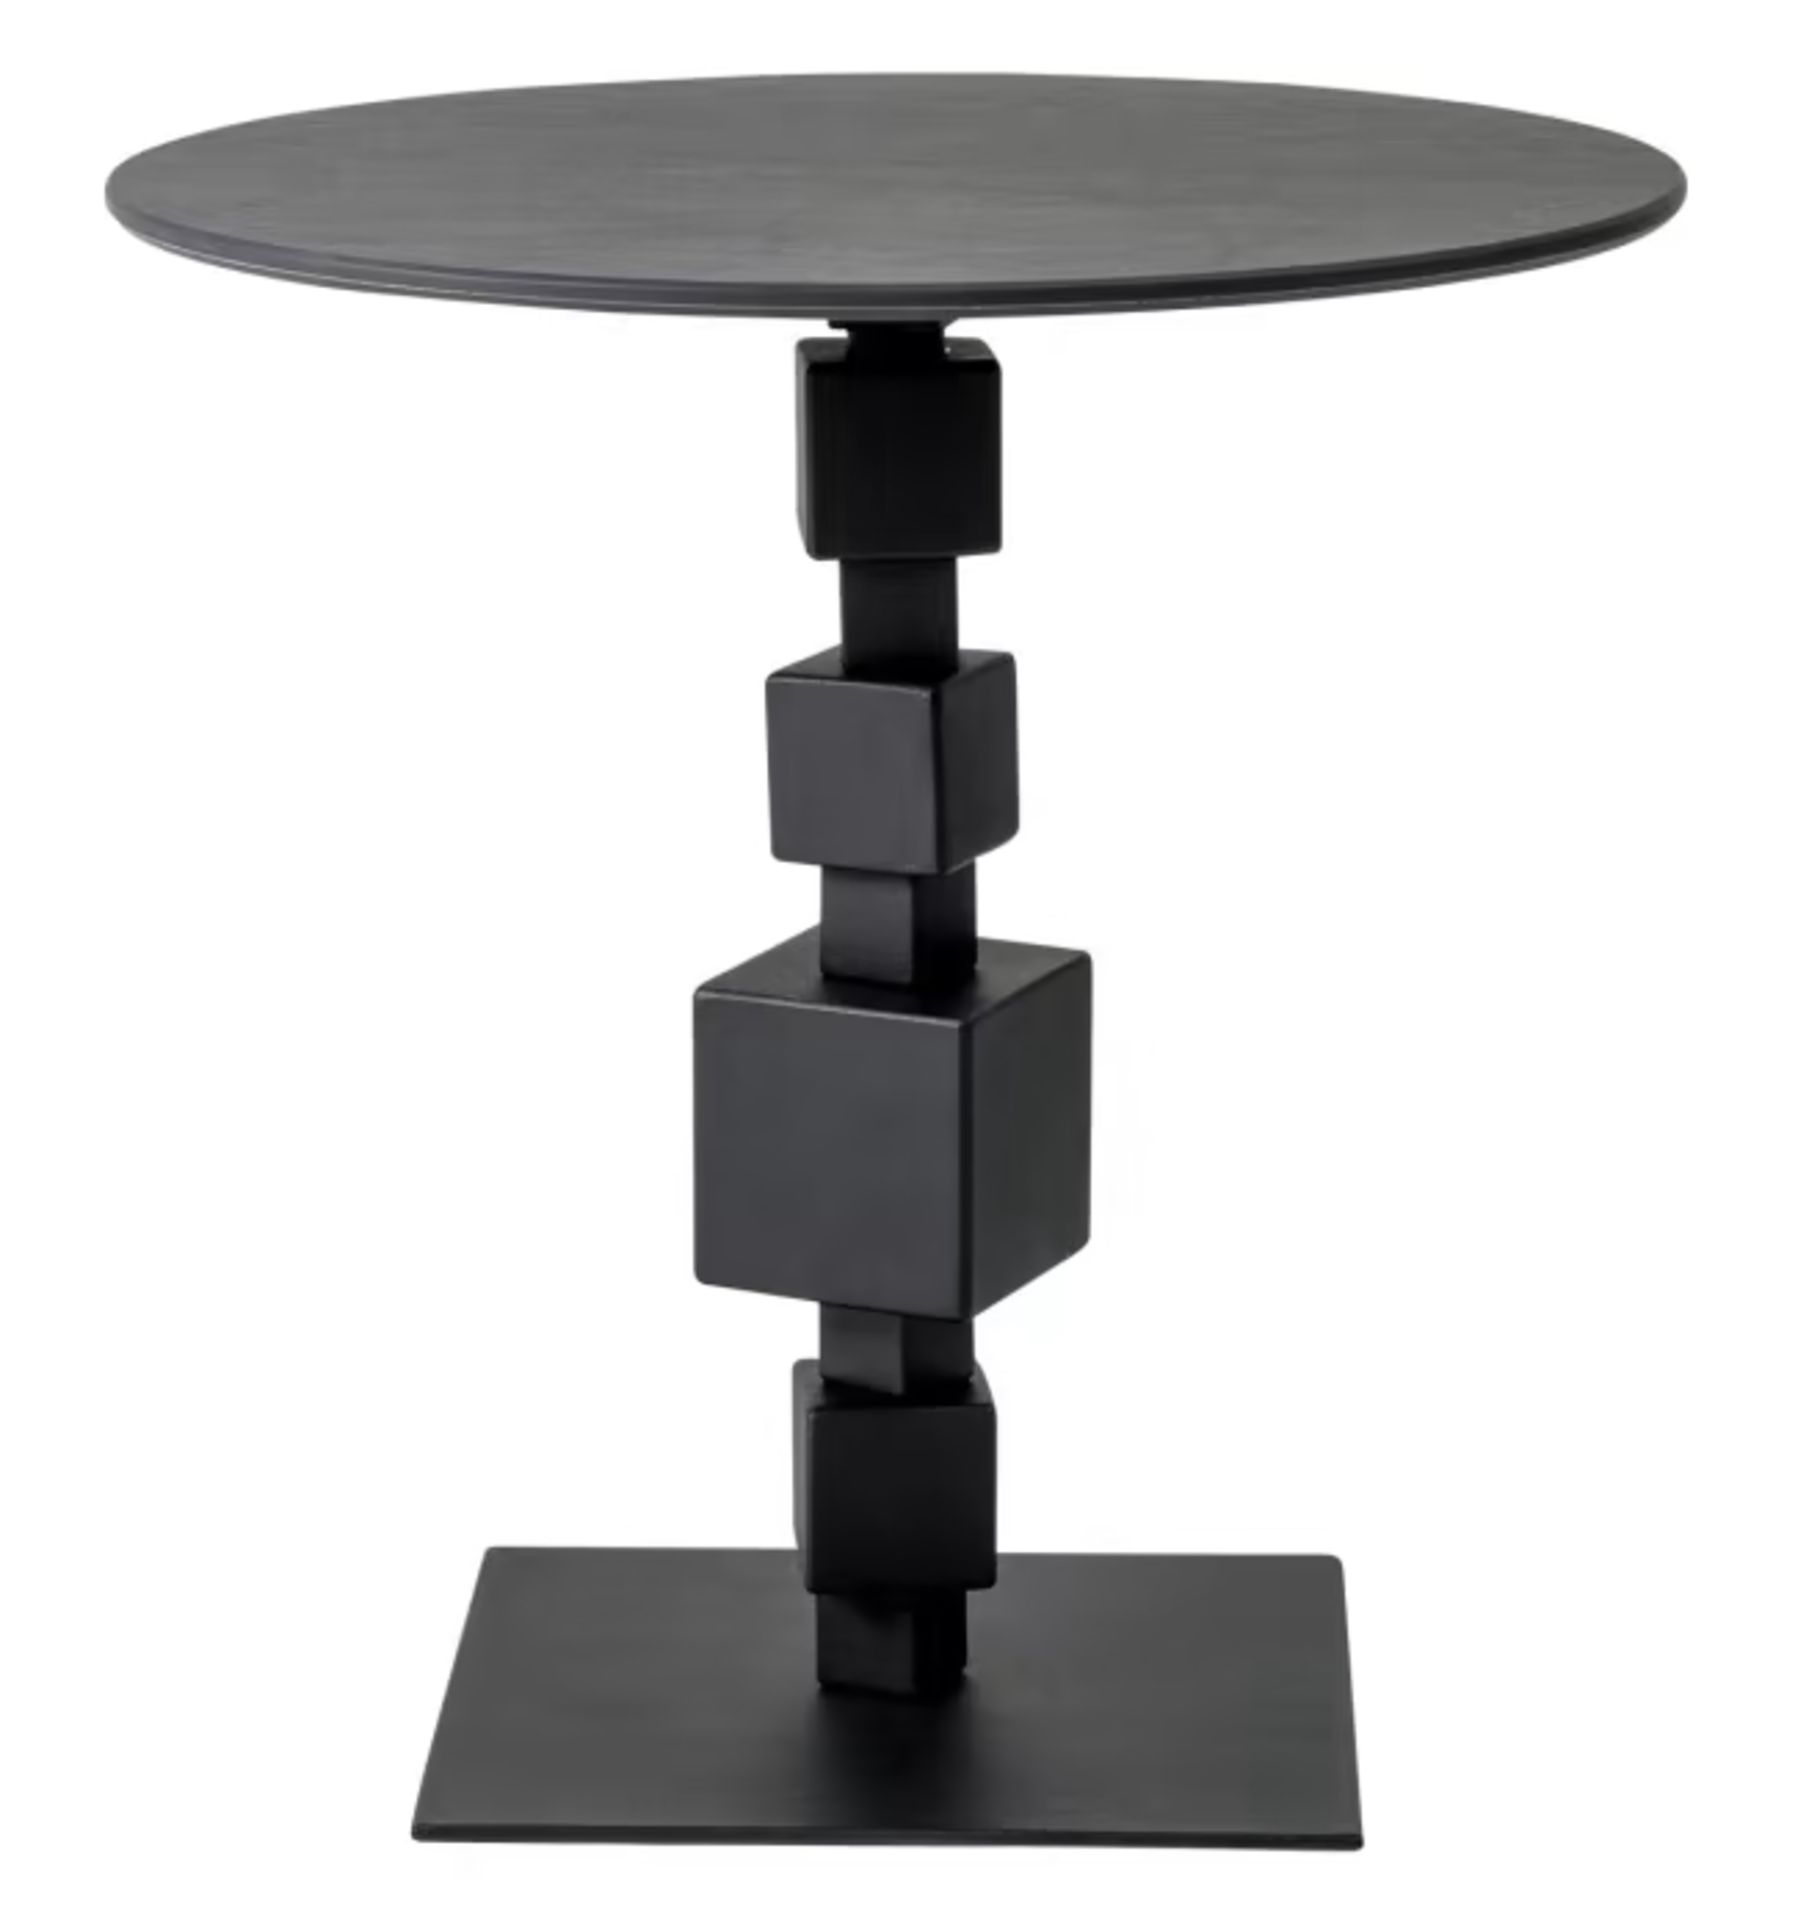 1 x NOLITA Occasional Side Table with a Cubed Metal Base, Bronzed Finish and Industrial - Image 7 of 9